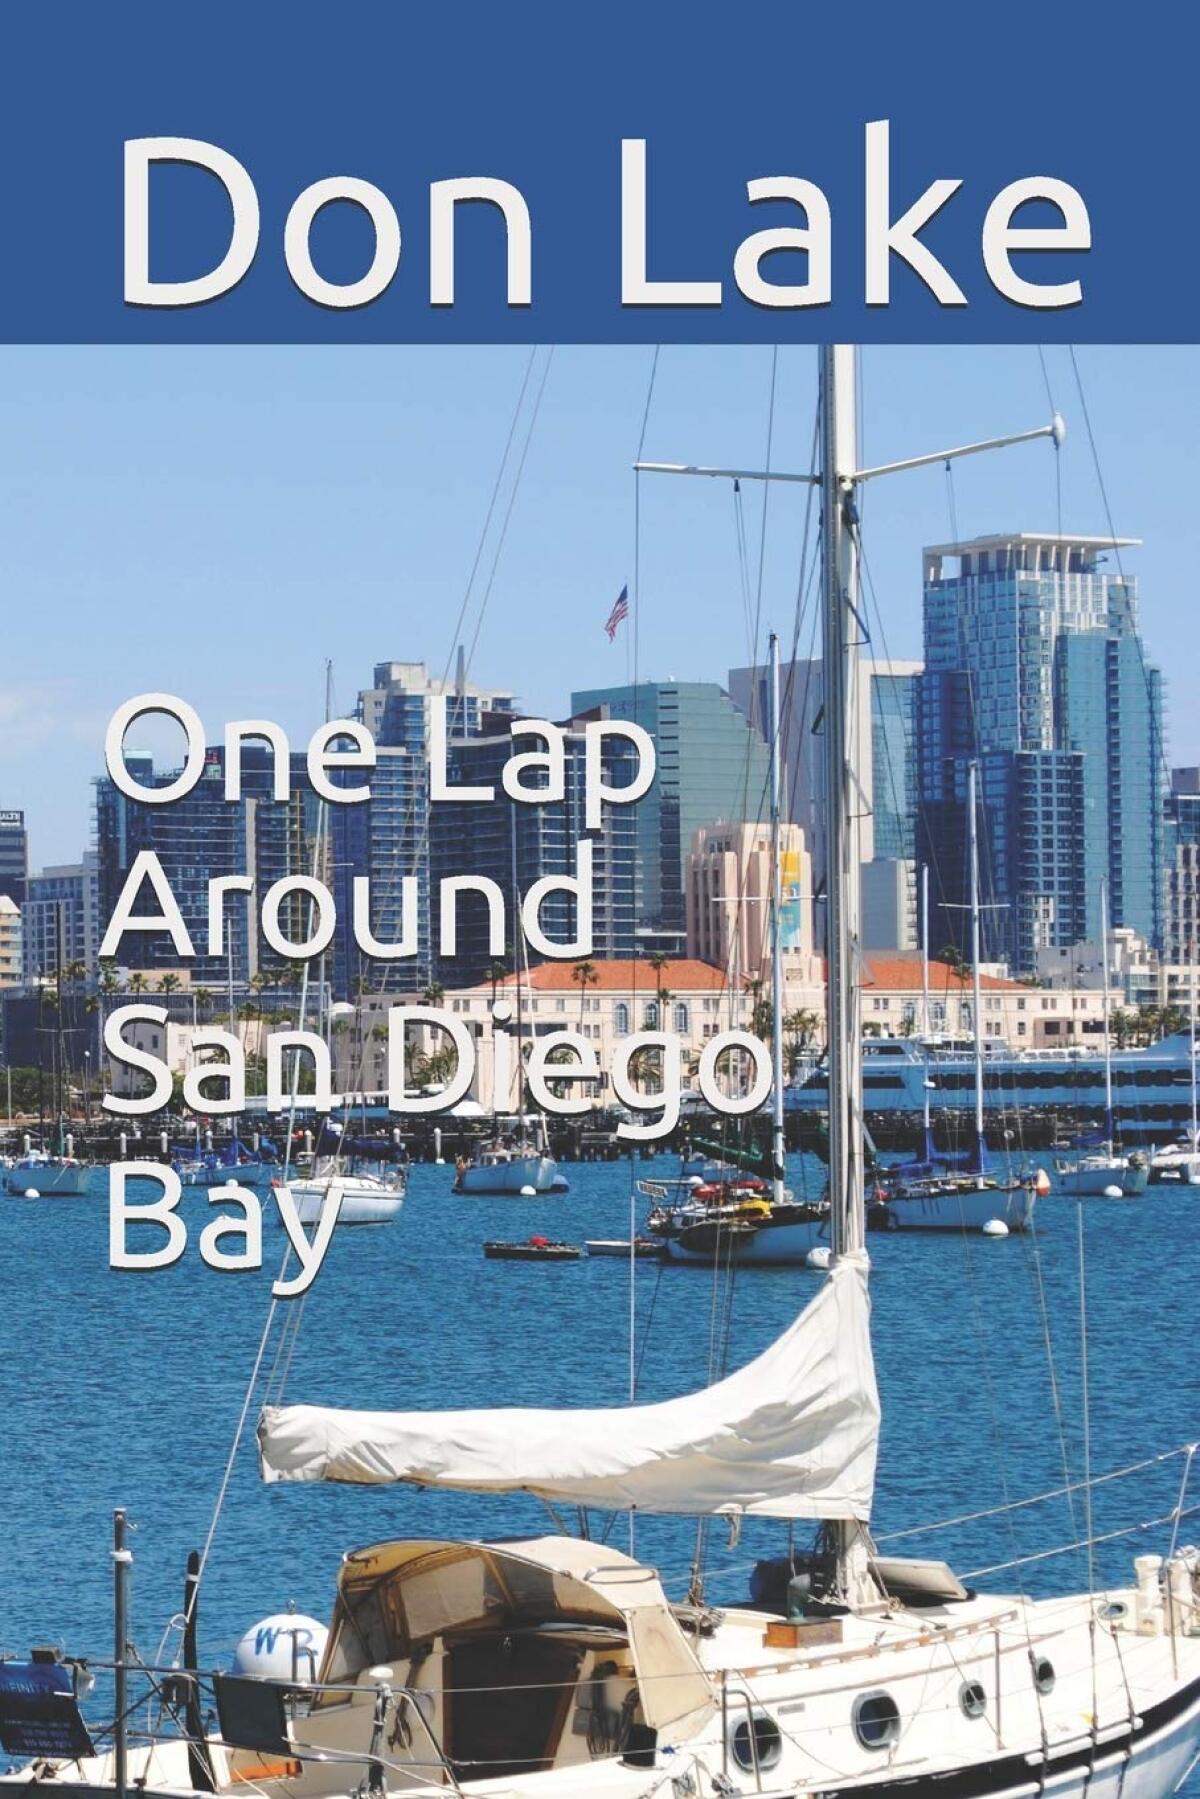 Don Lake's book "One Lap Around San Diego Bay" features 100 San Diego locations along the water.